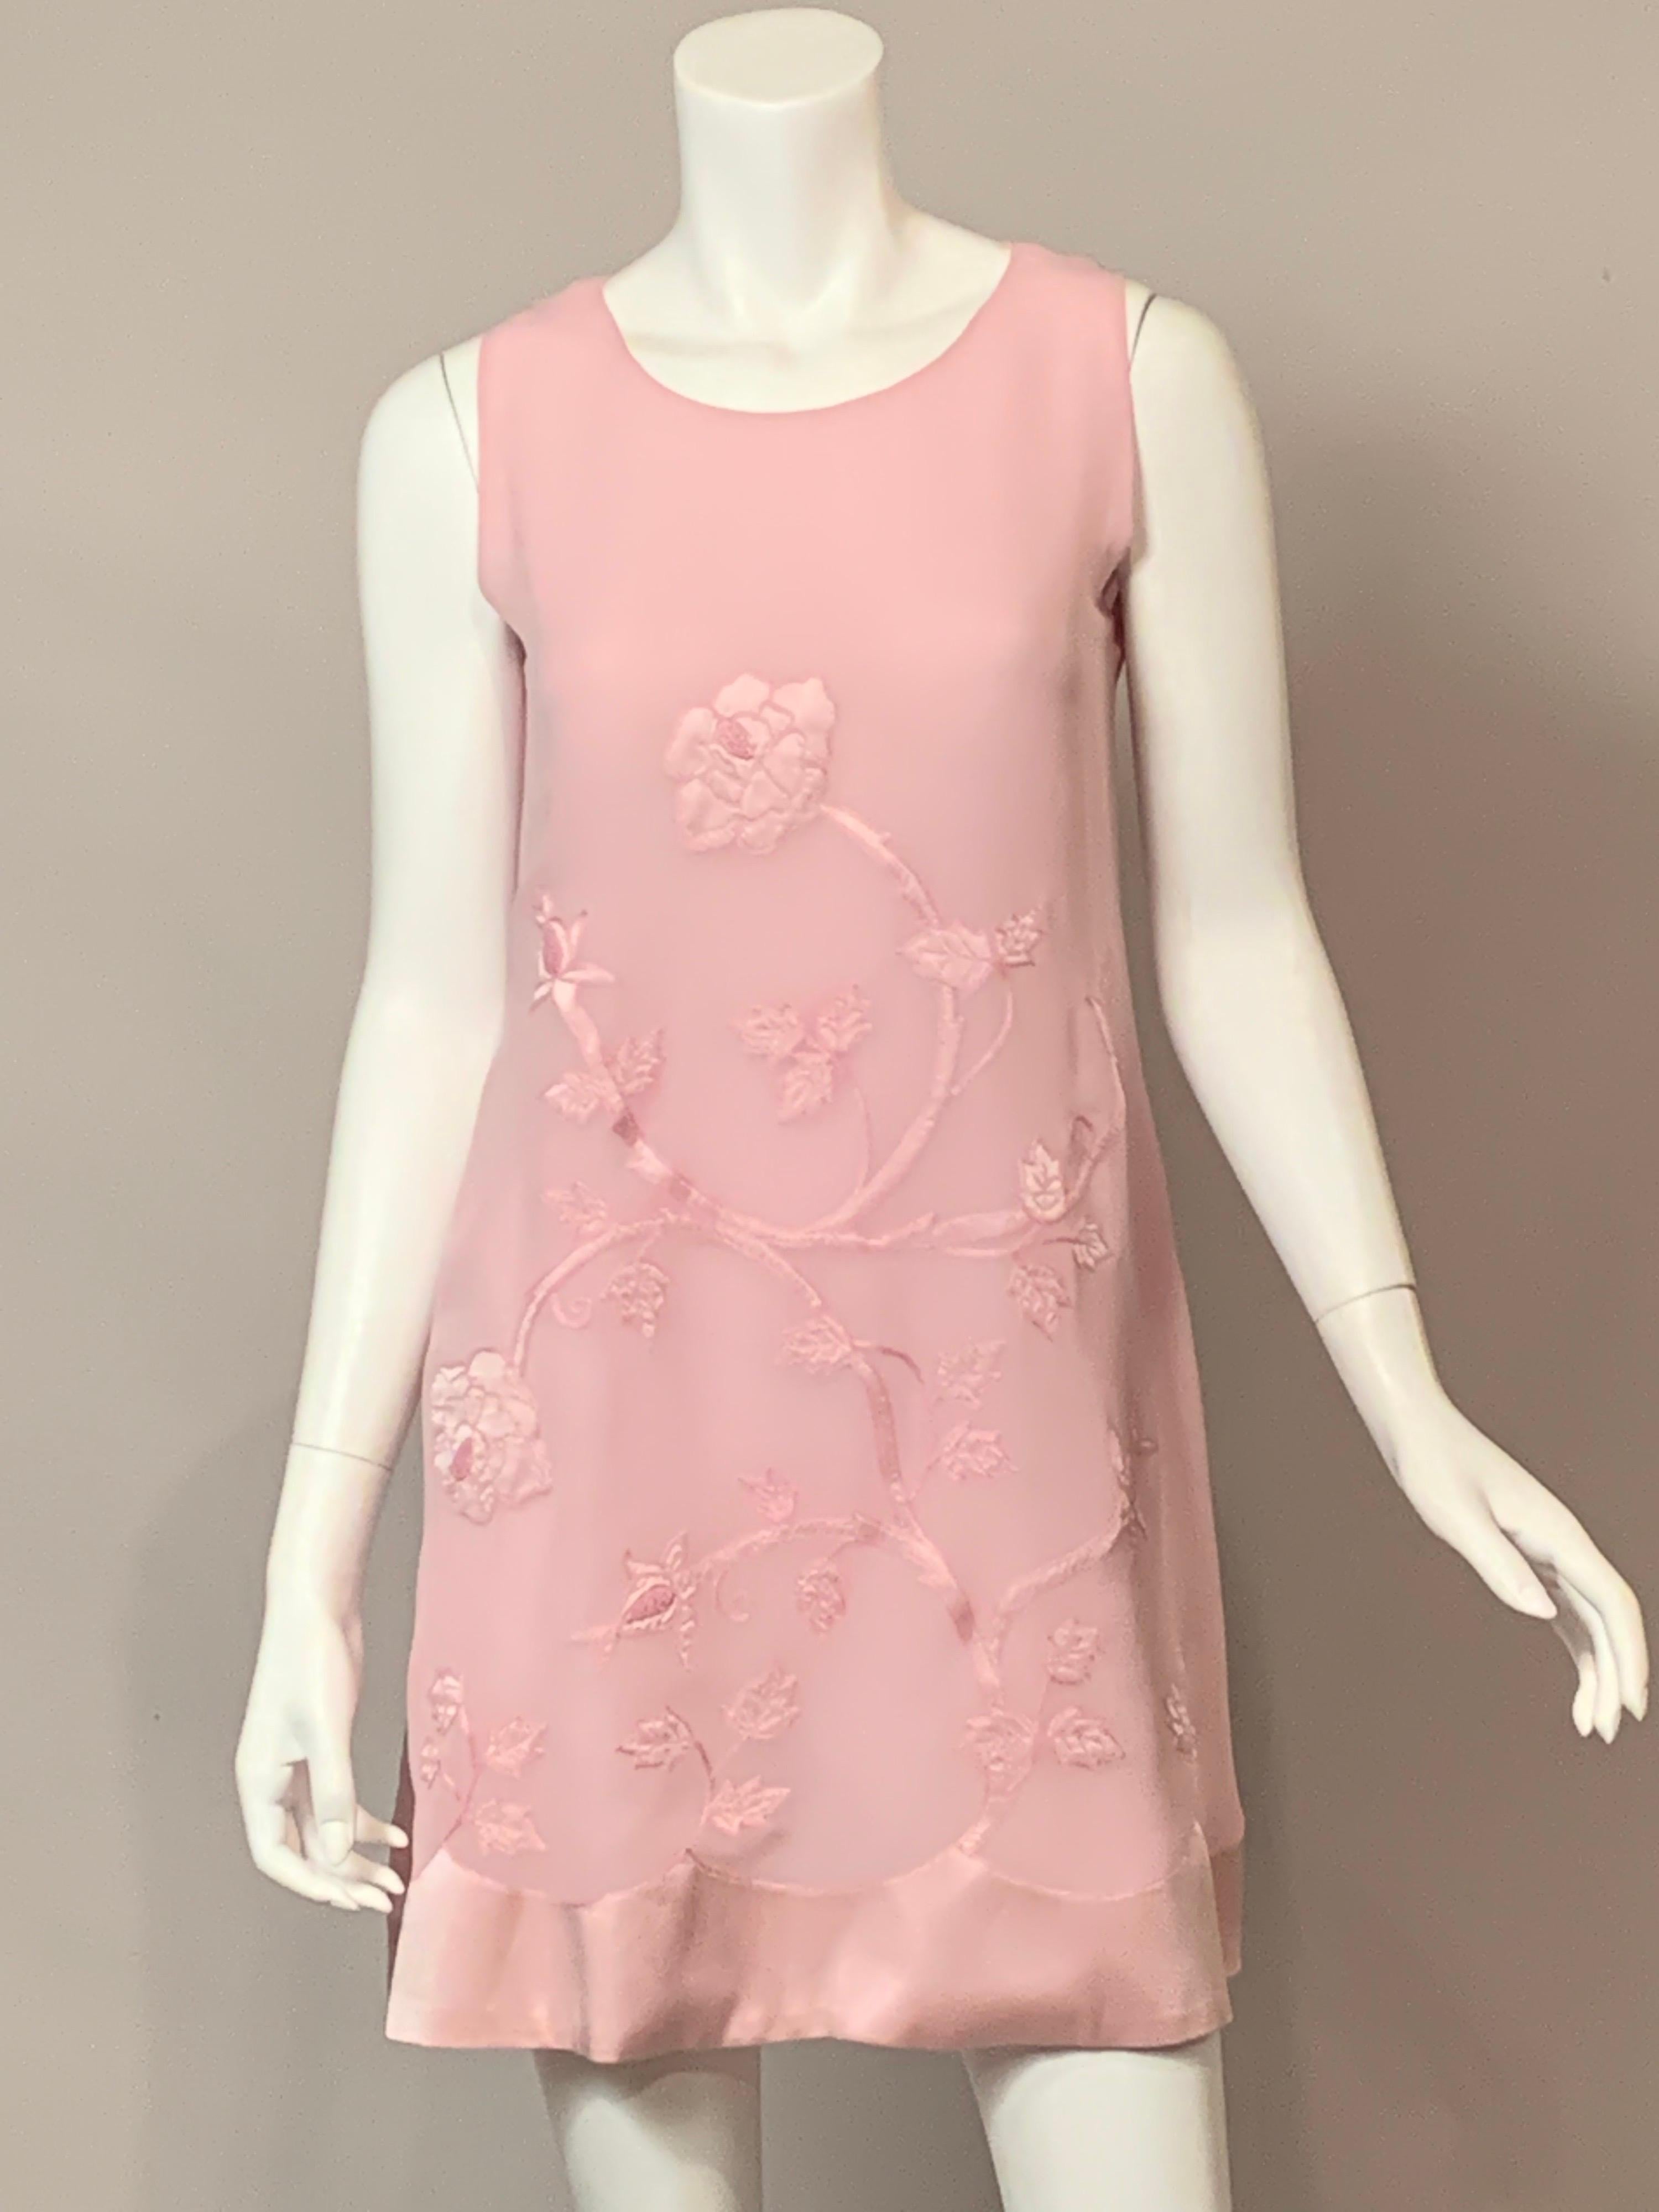 This is a very feminine dress from Italian designer Alberta Ferretti.  The dress is sleeveless with an A line shape.  There is a wide scalloped satin band at the hemline with a flower and vine satin applique branching out from this band.  The vine